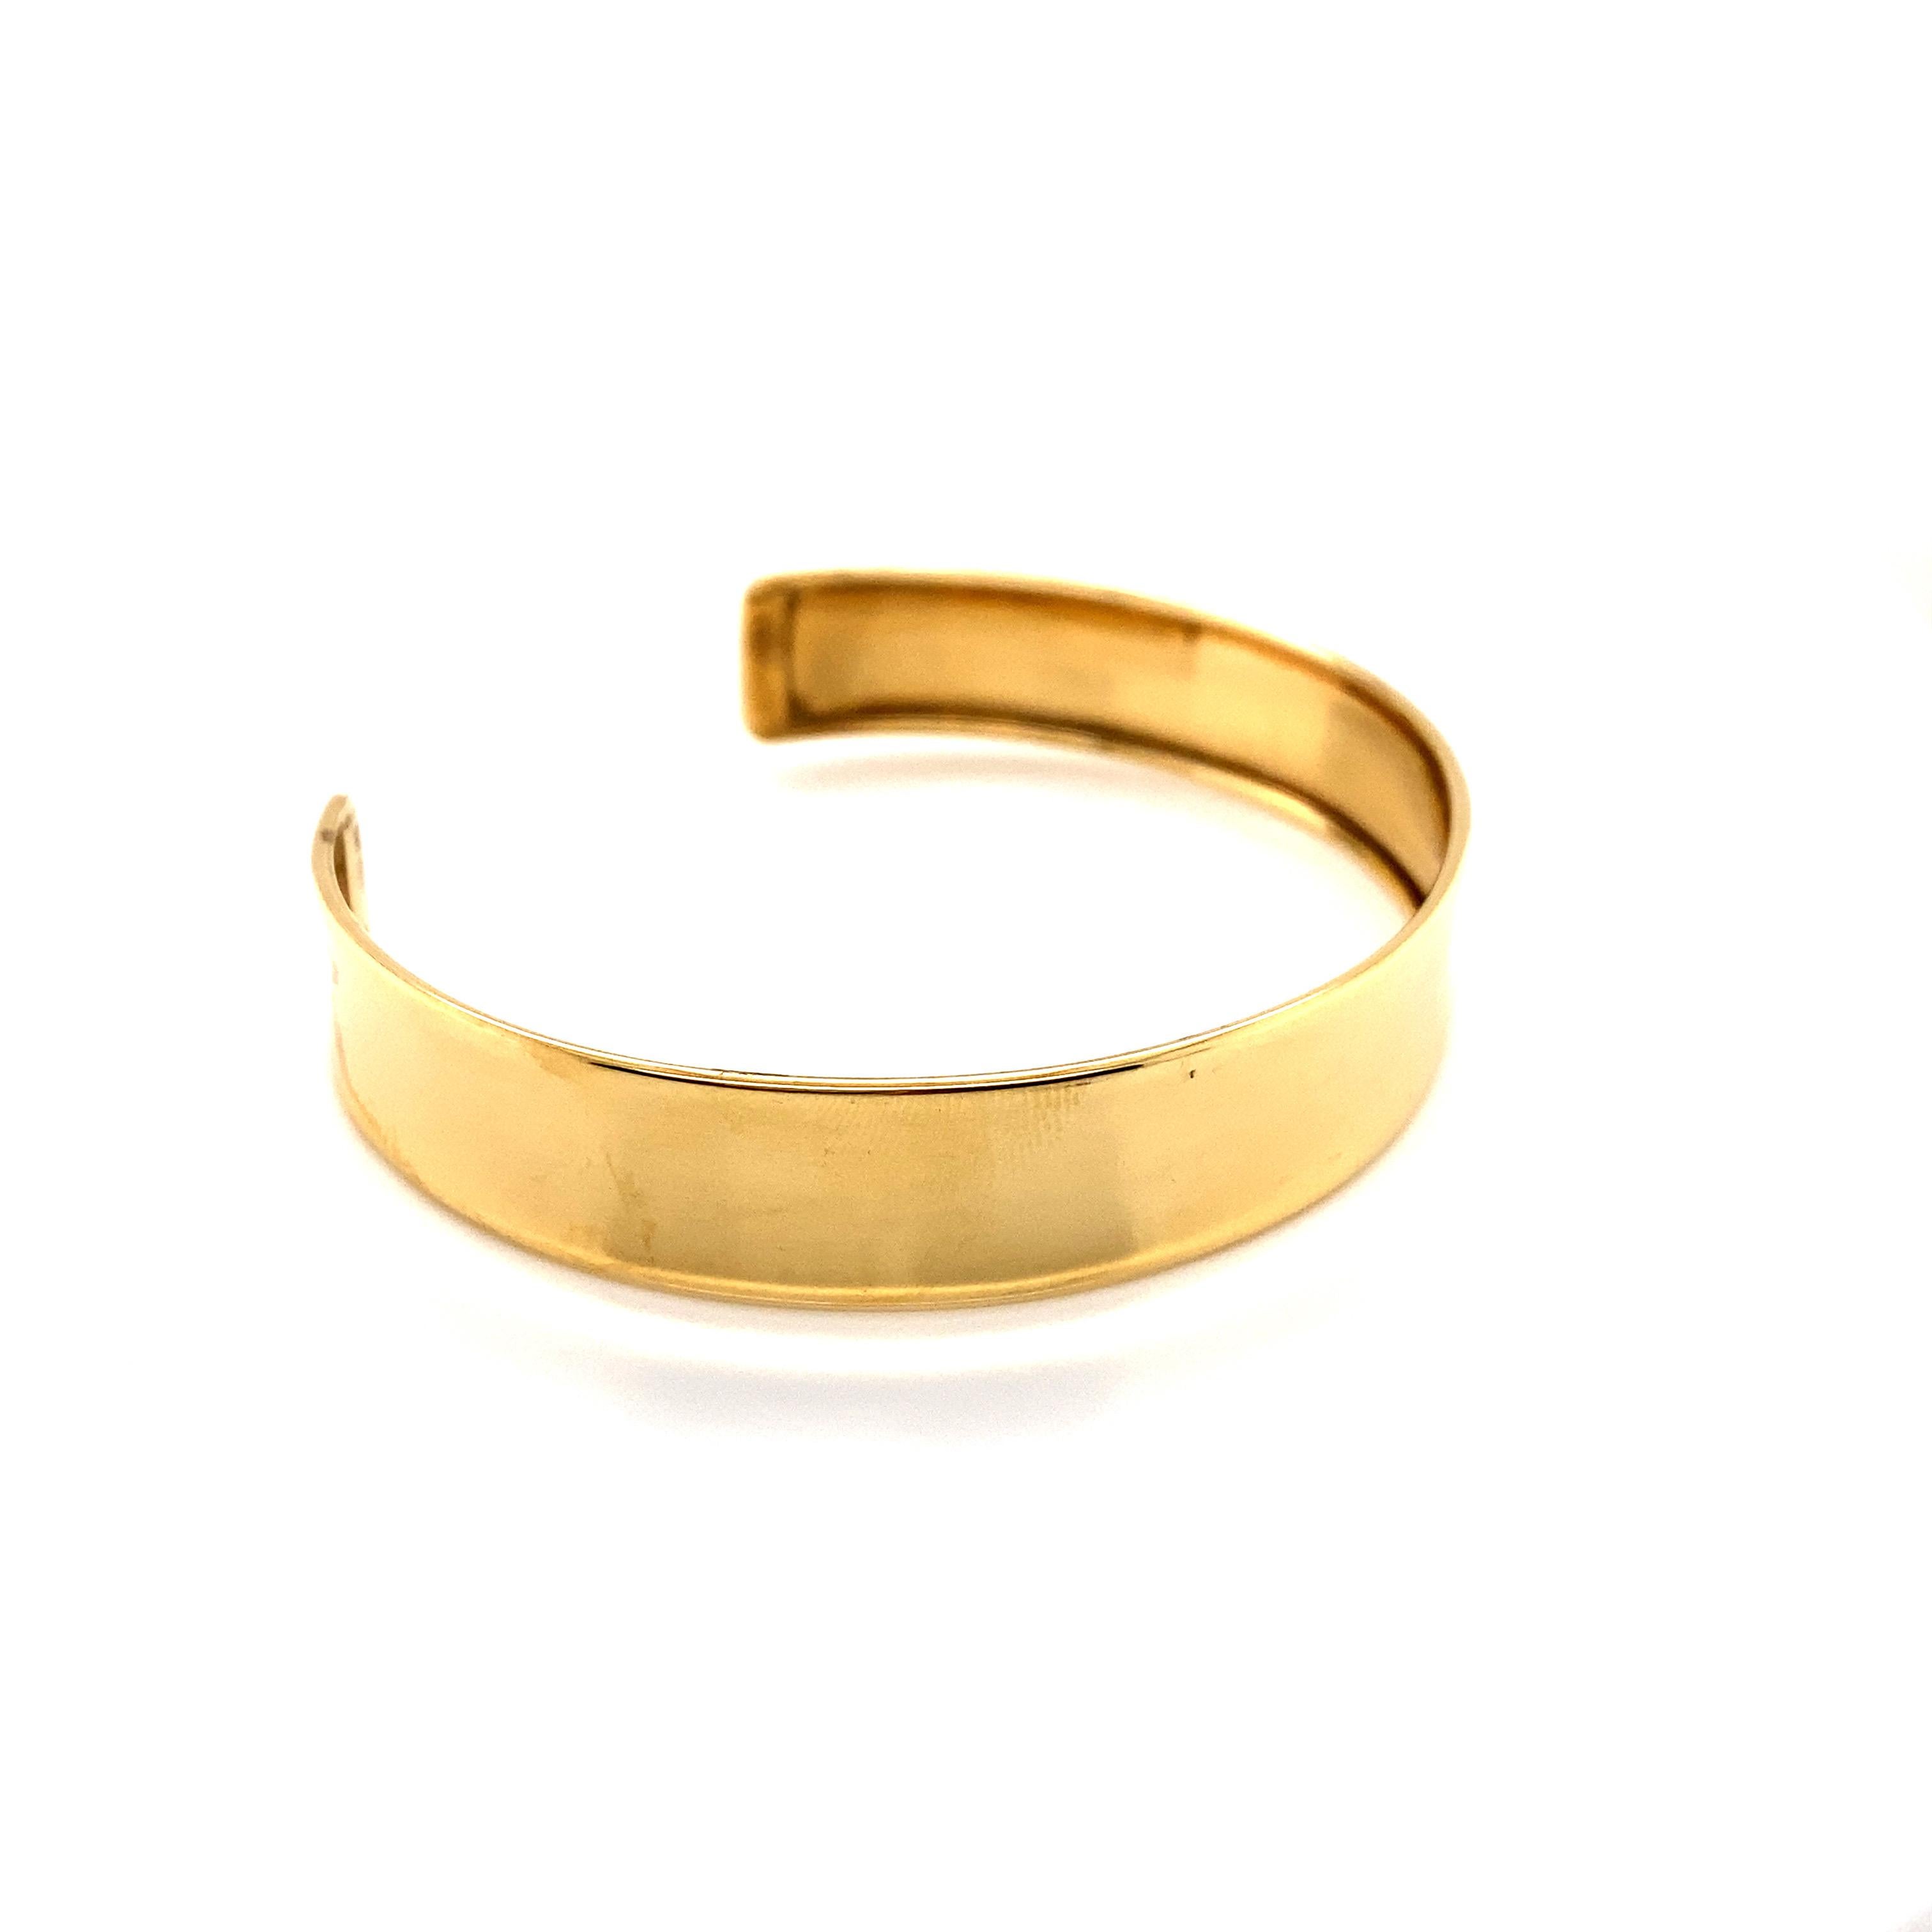 Vintage 1990’s 14k yellow gold cuff bangle bracelet. The cuff bangle measures 1/2